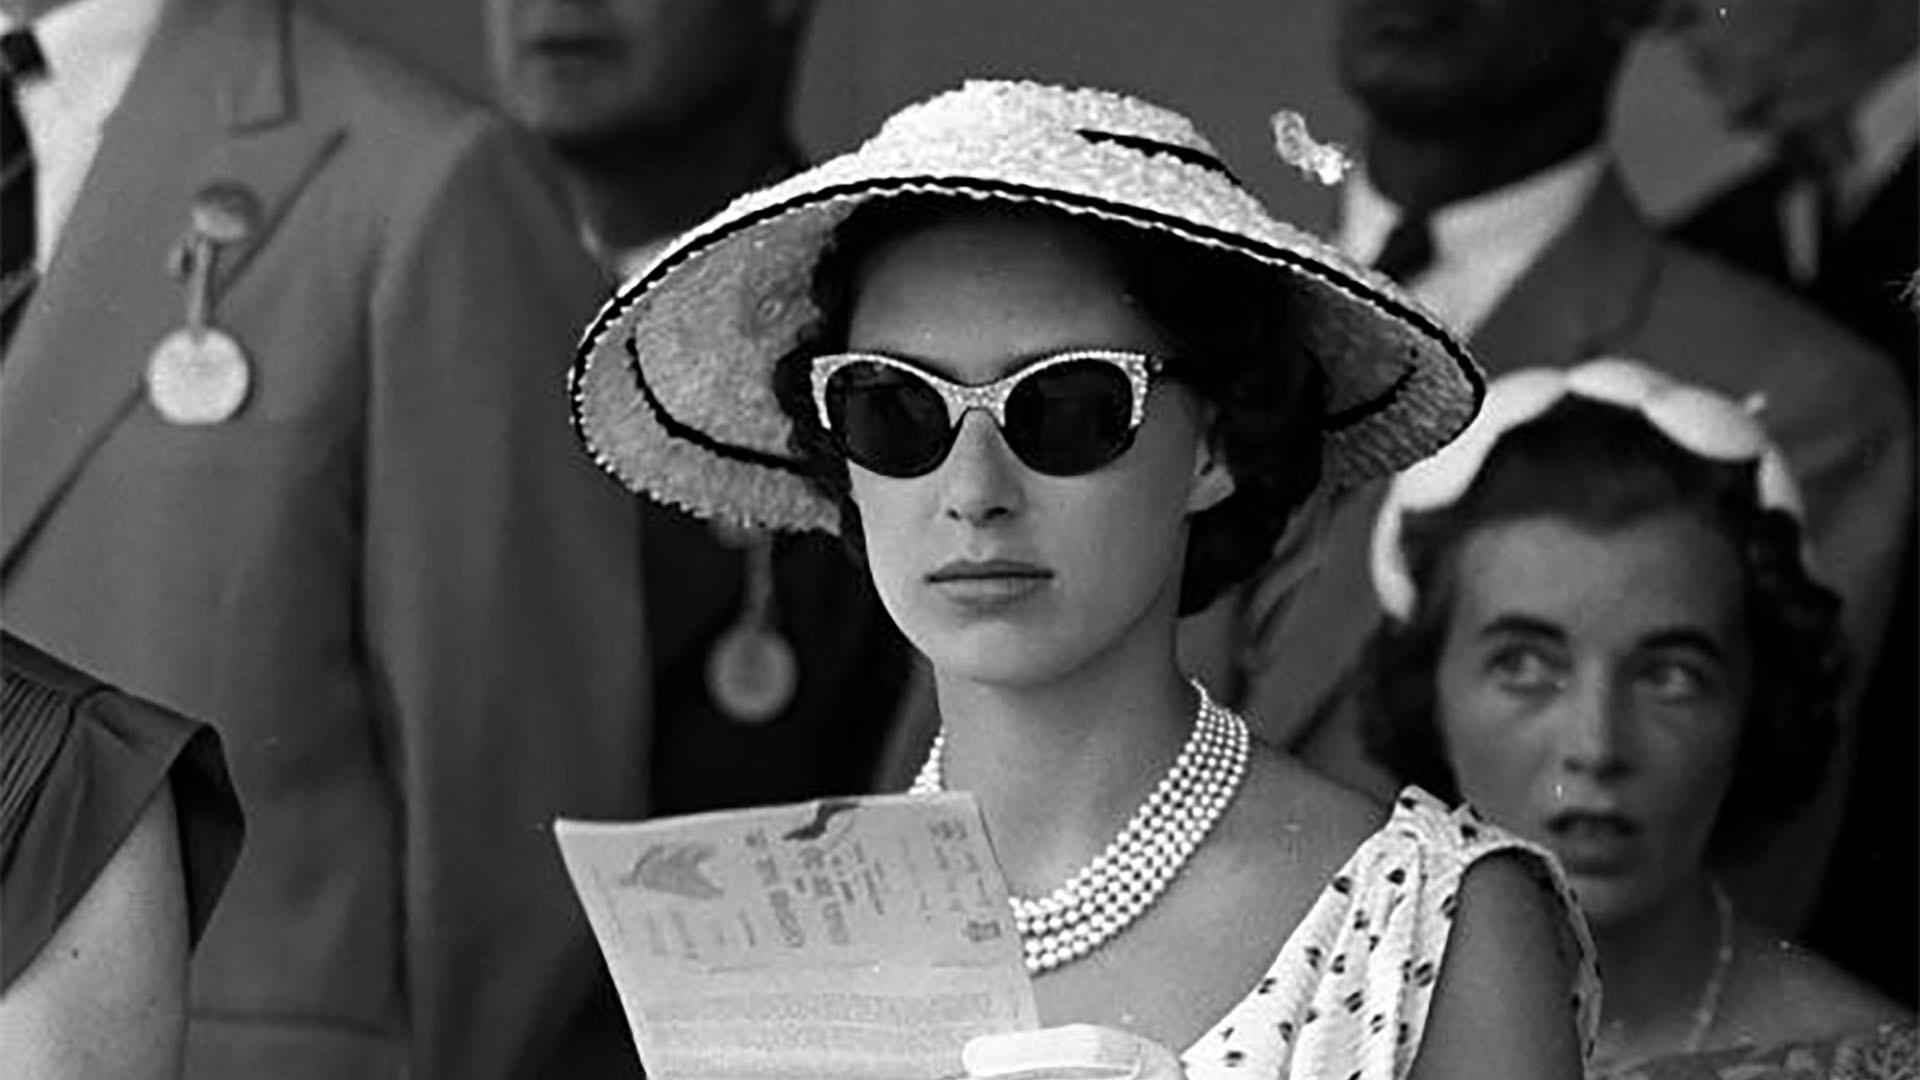 A Black and white photo of a young Princess Margaret wearing a white hat and sun glasses with pearls and a polk-a-dot dress.